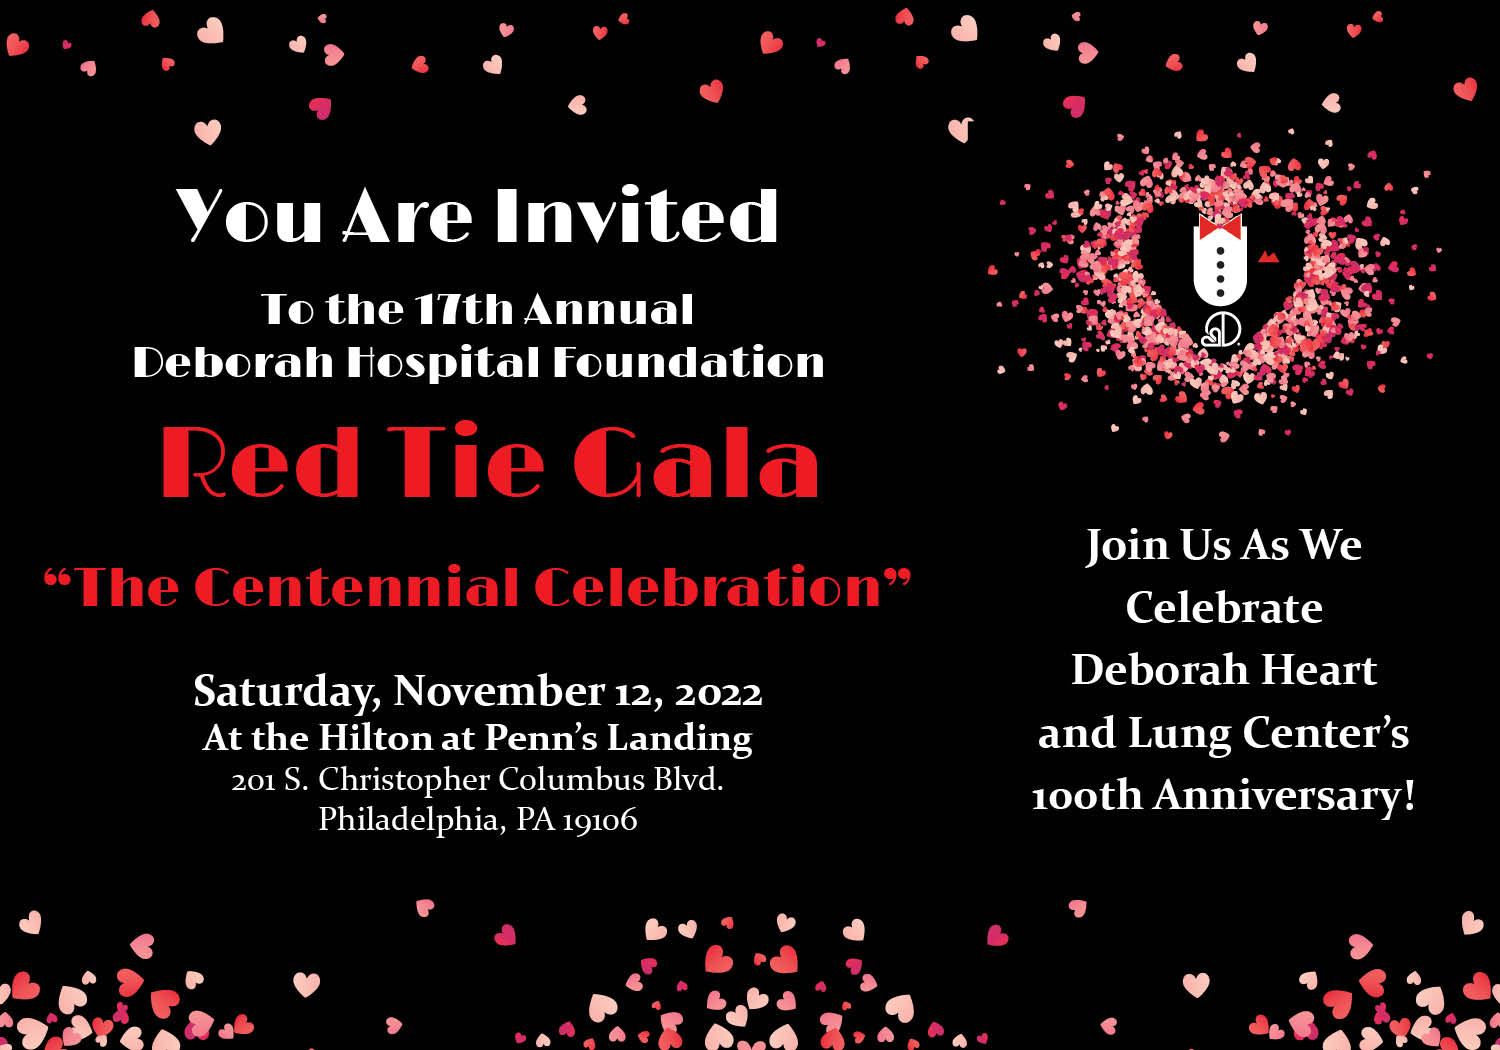 You are invited to the 17th annual Deborah Hospital Foundation Red Tie Gala